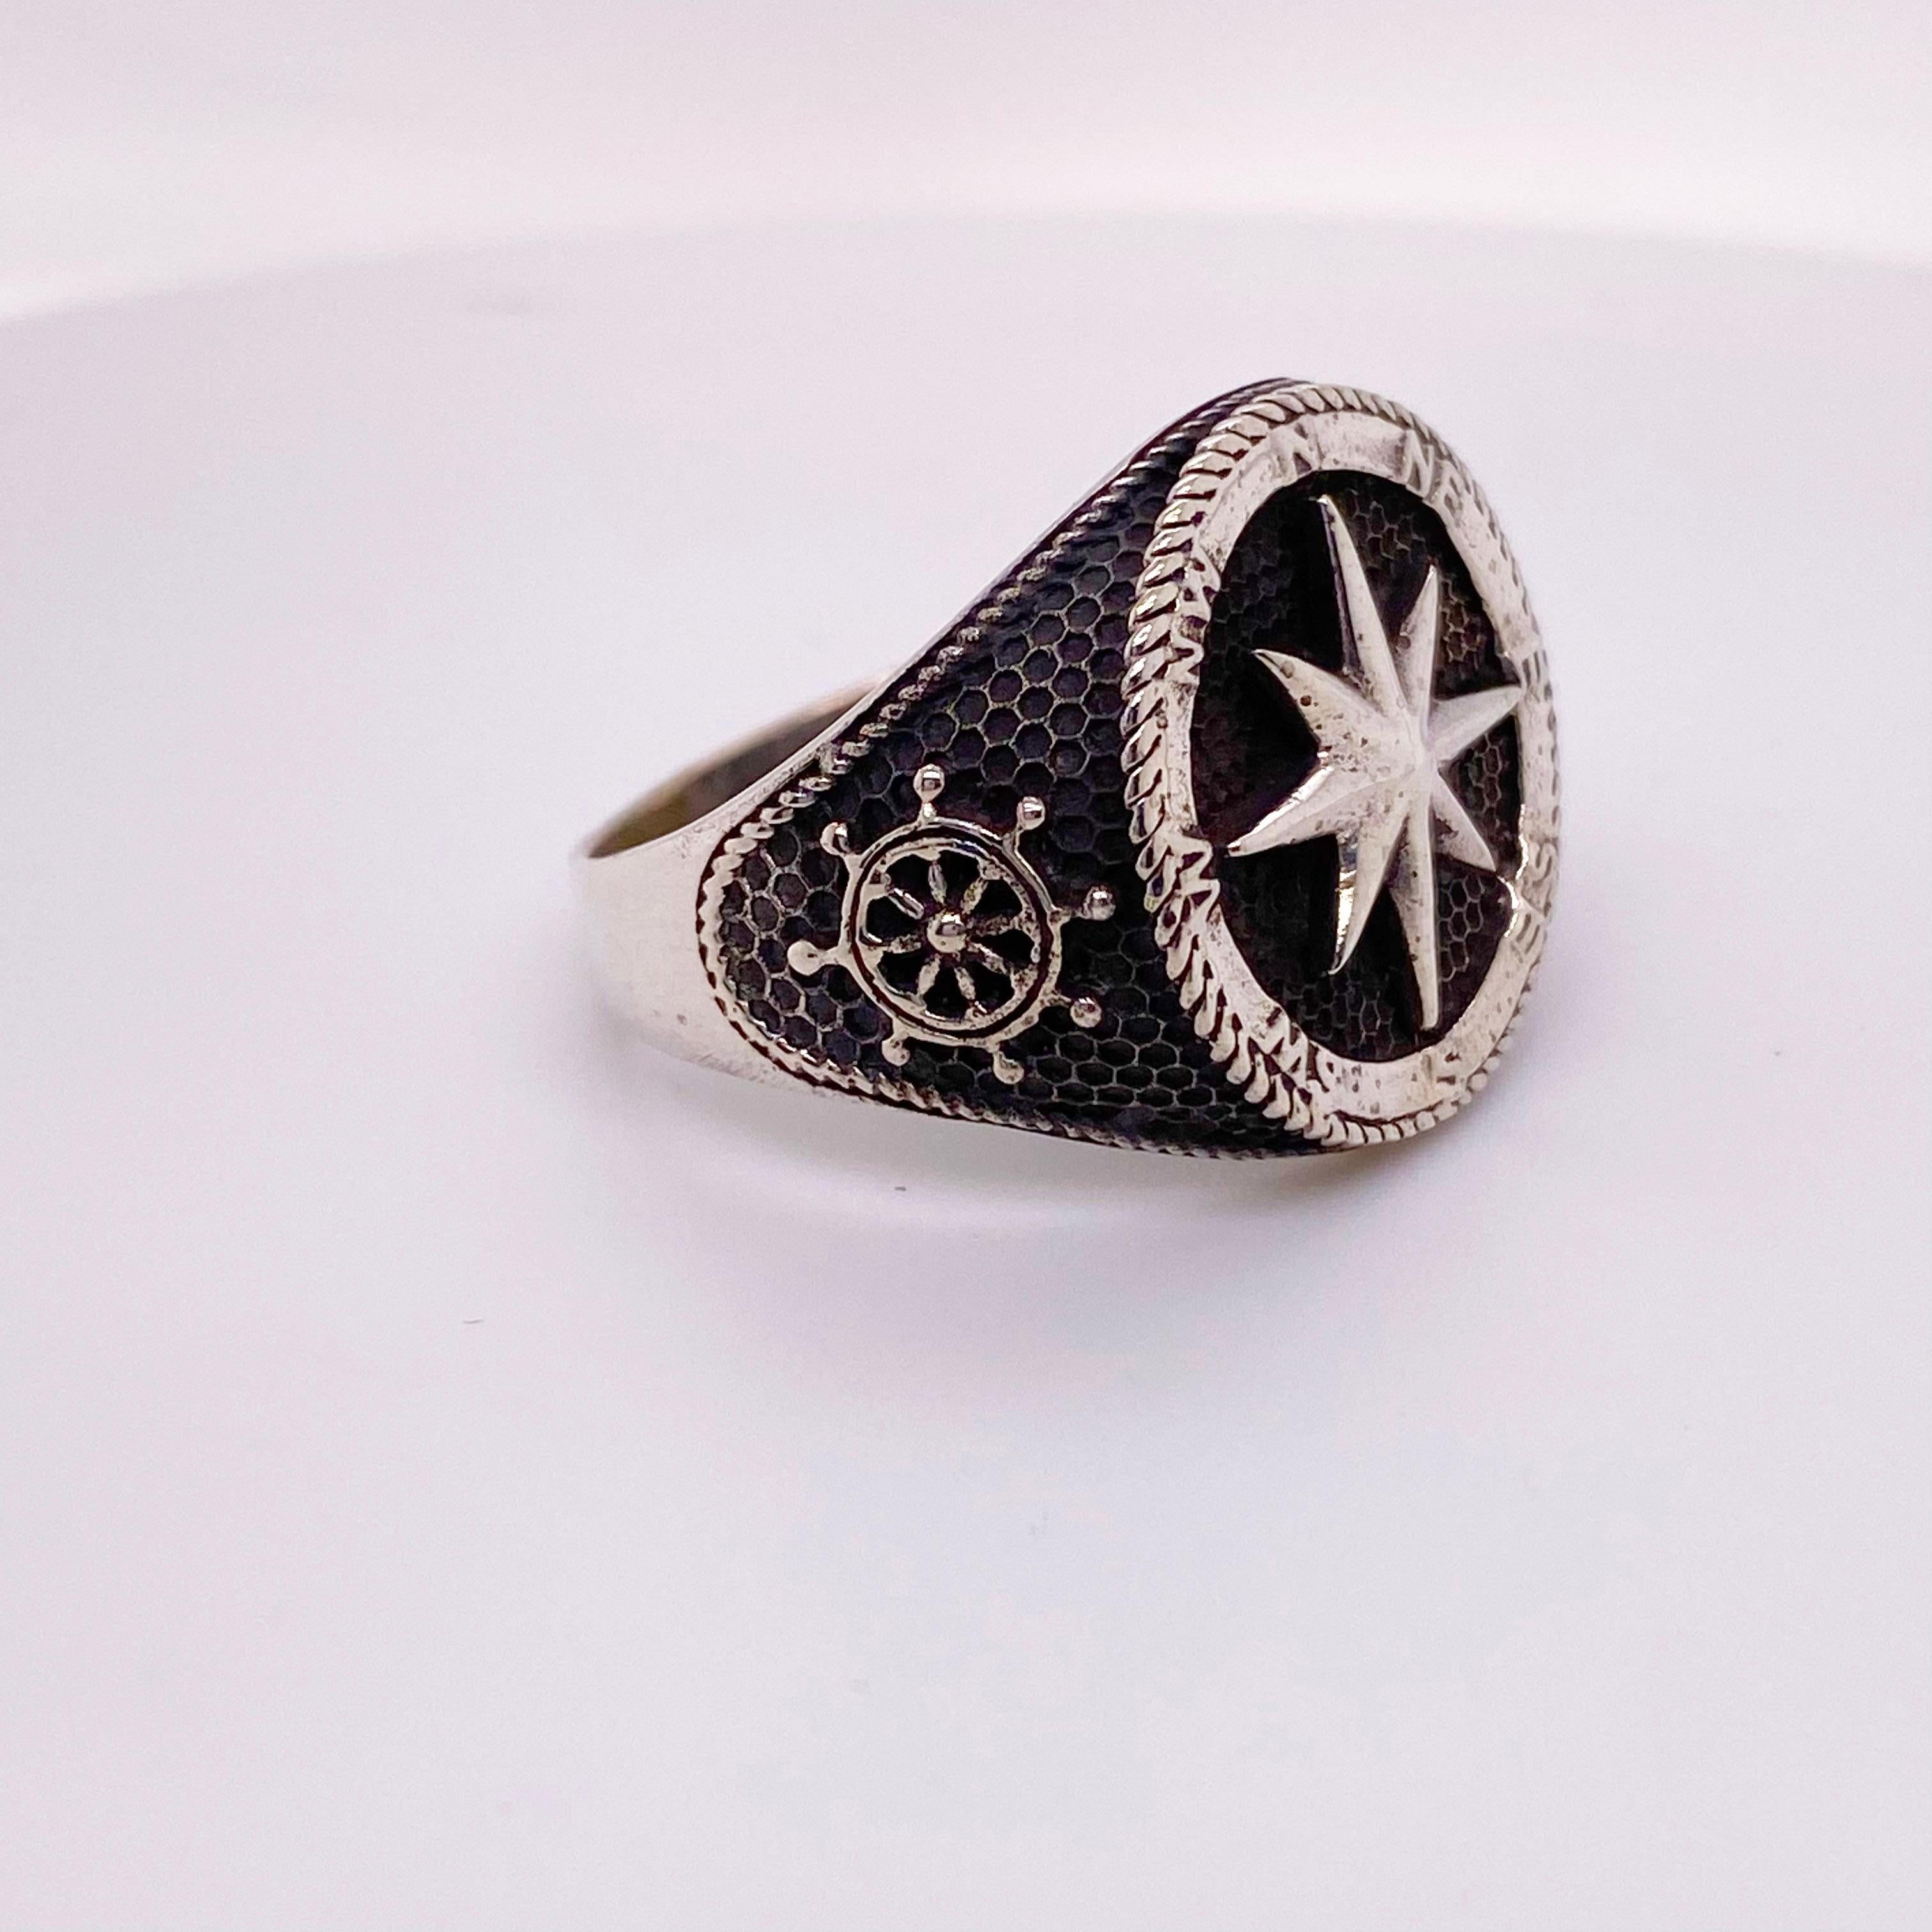 You want to make sure that you are going to right direction-following your heart, following your faith, following your beliefs.  This compass ring will signify that and will always lead you in the right direction!  This ring has been made by the